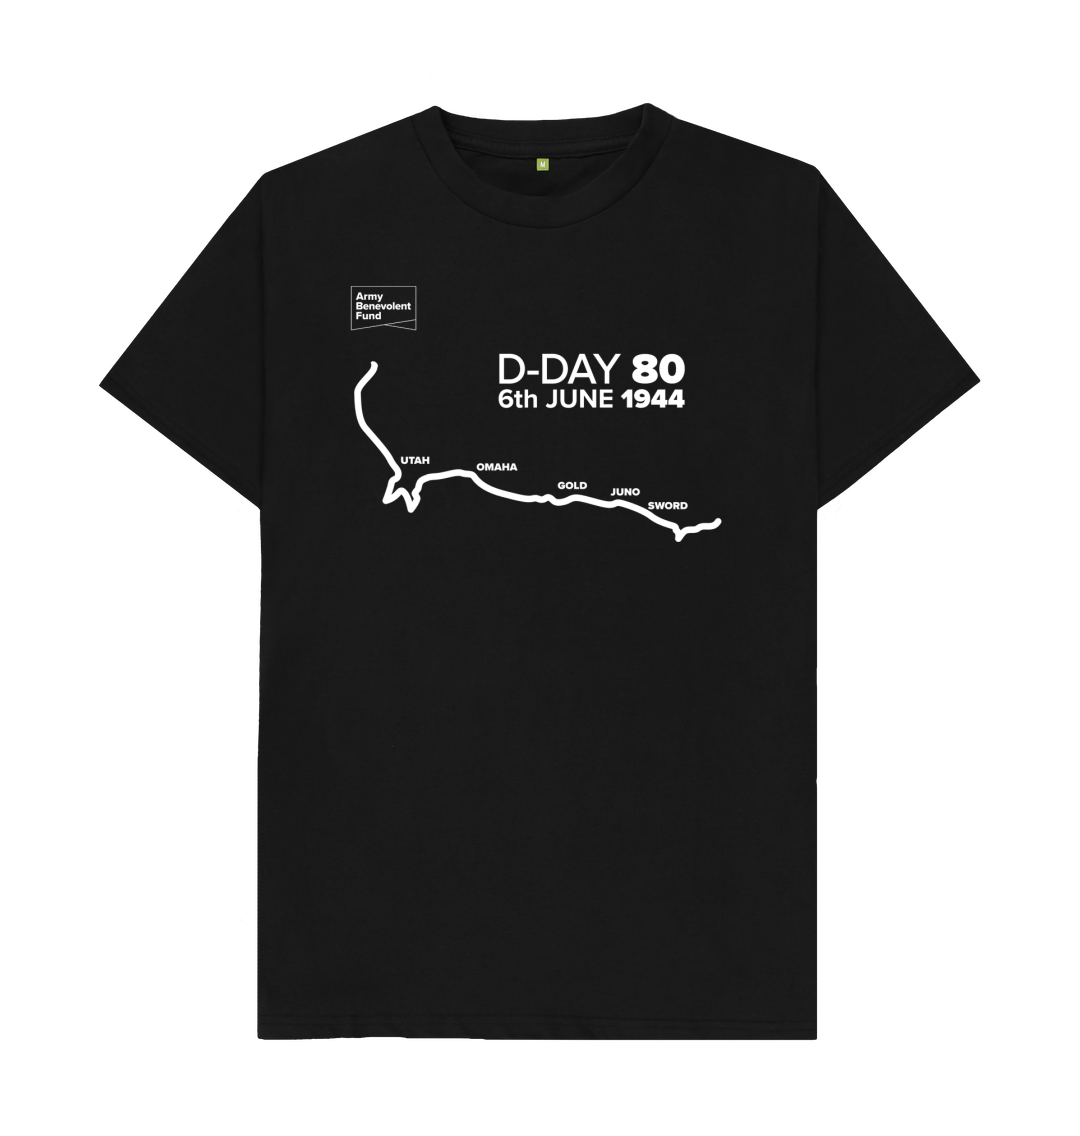 D-Day 80 map T-shirt - Army Benevolent Fund